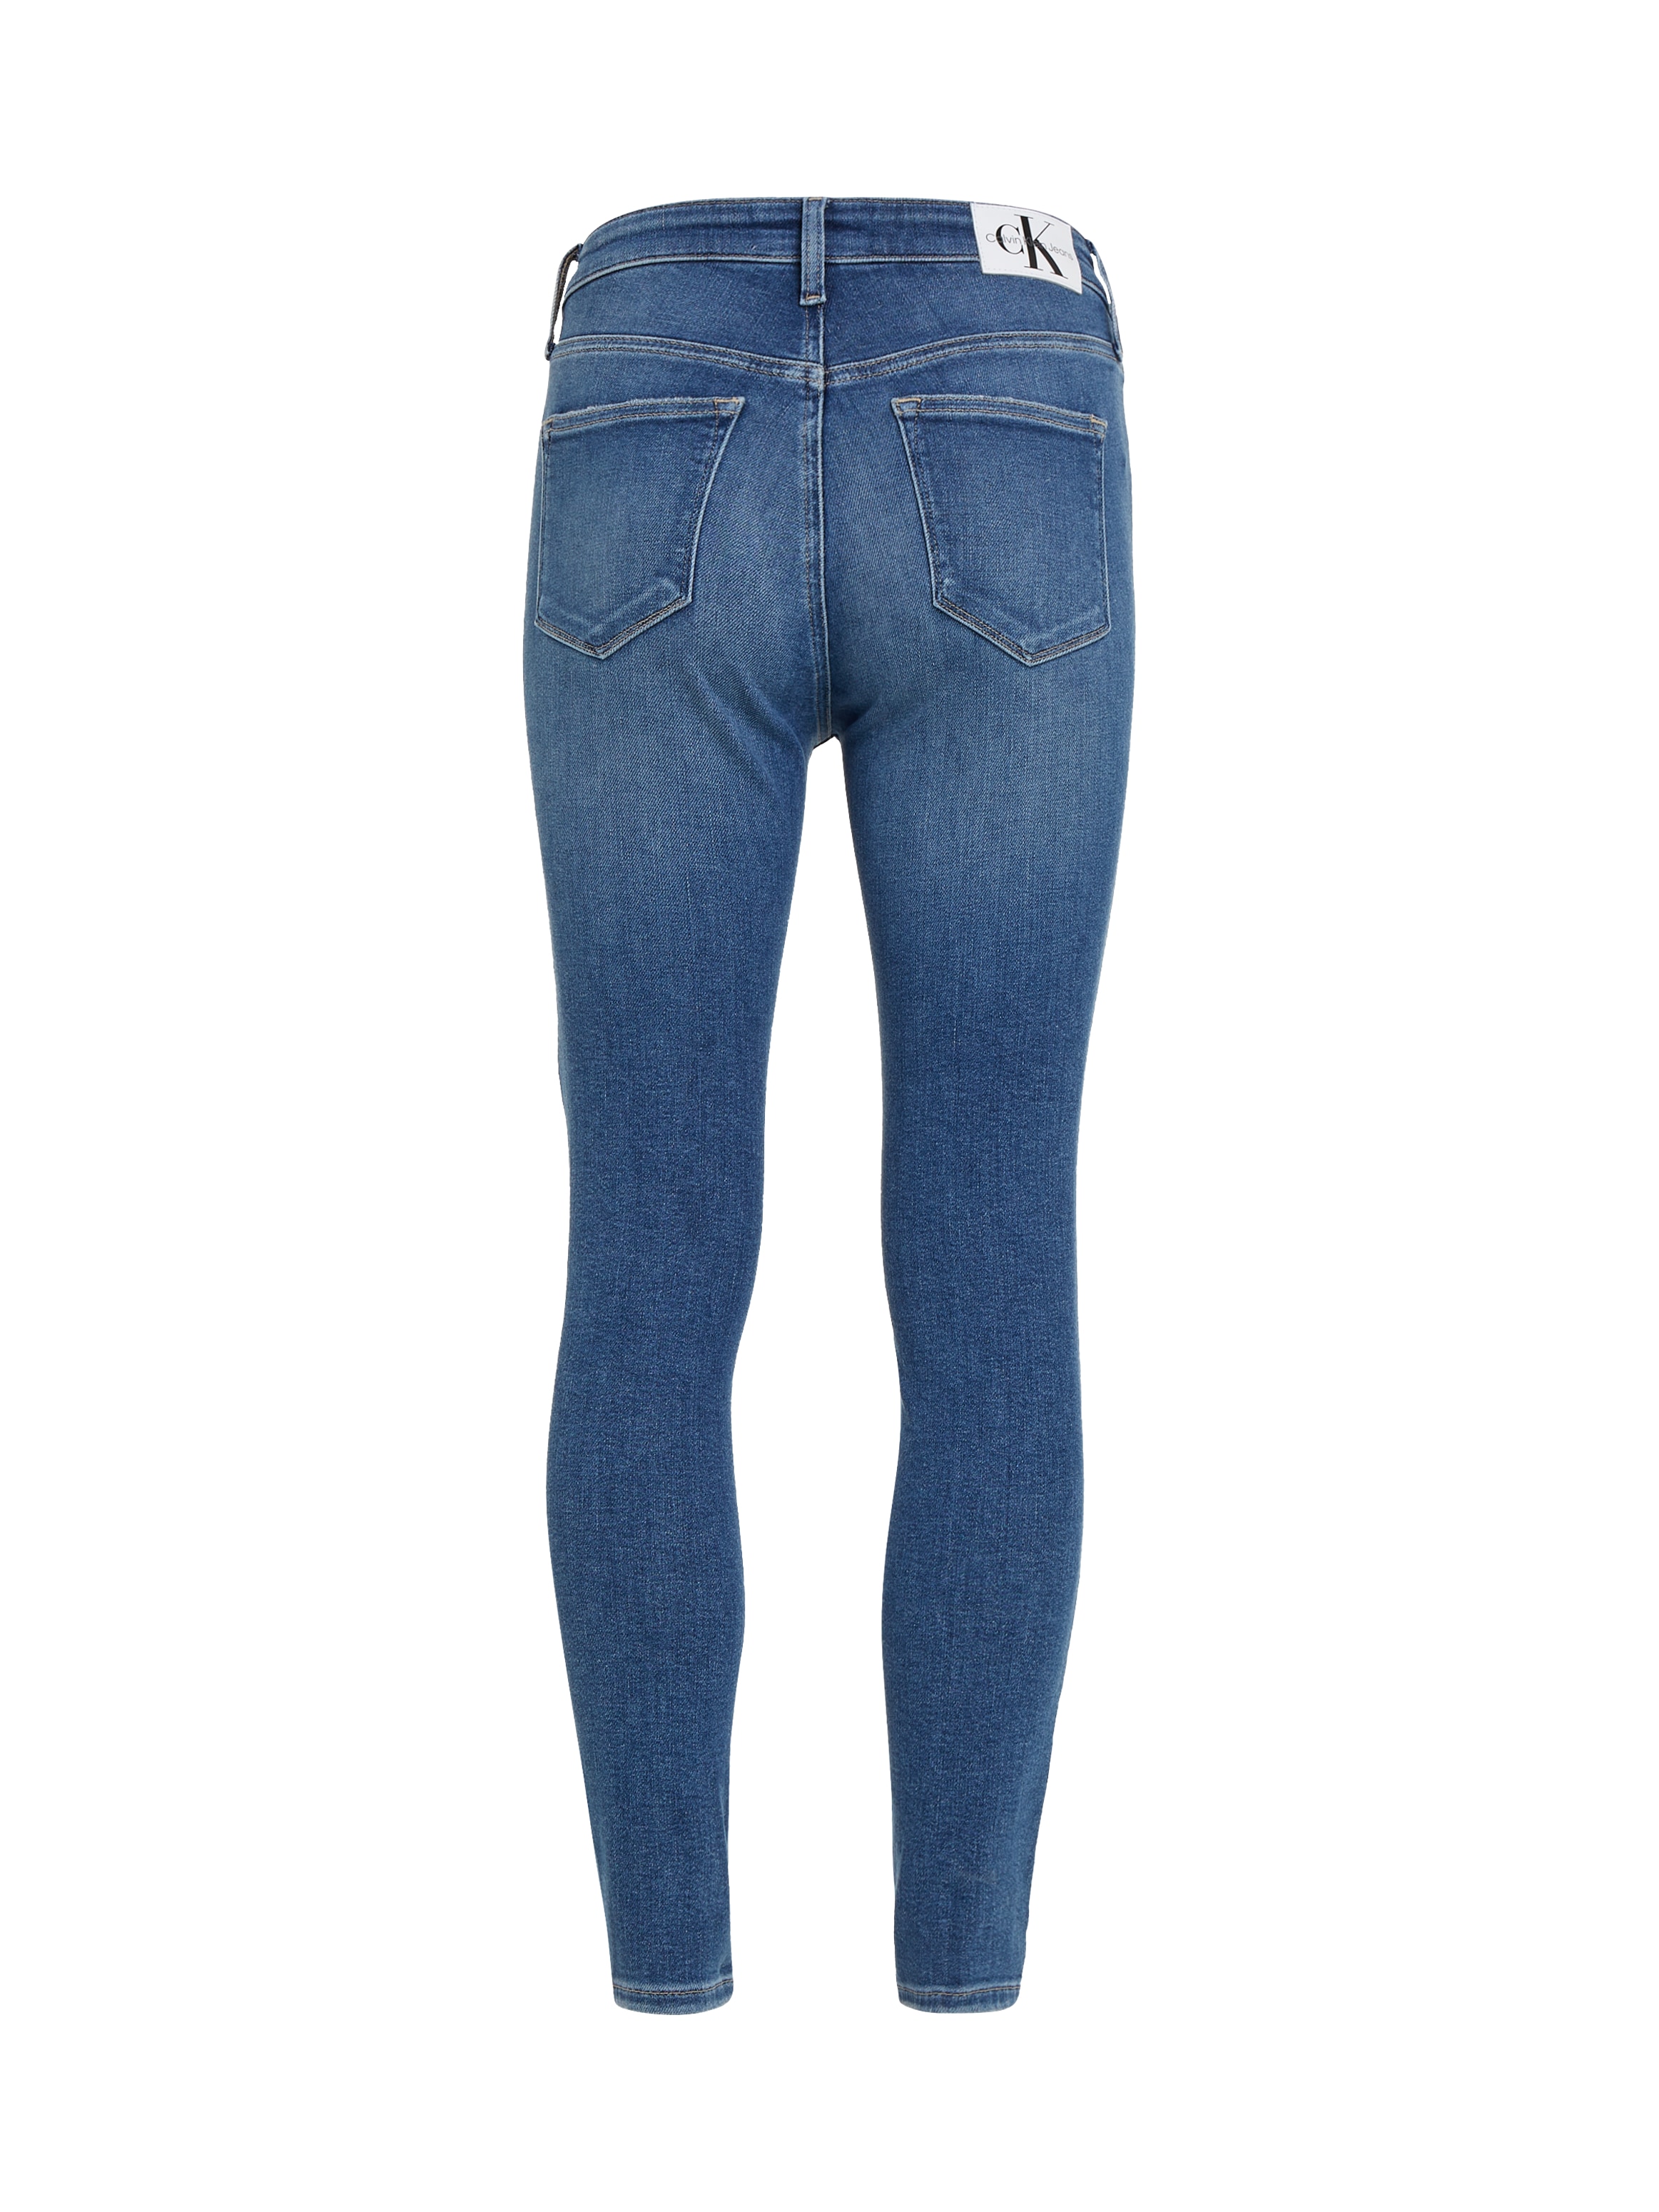 RISE ANKLE« SUPER ♕ Ankle-Jeans Klein SKINNY Calvin »HIGH bei Jeans